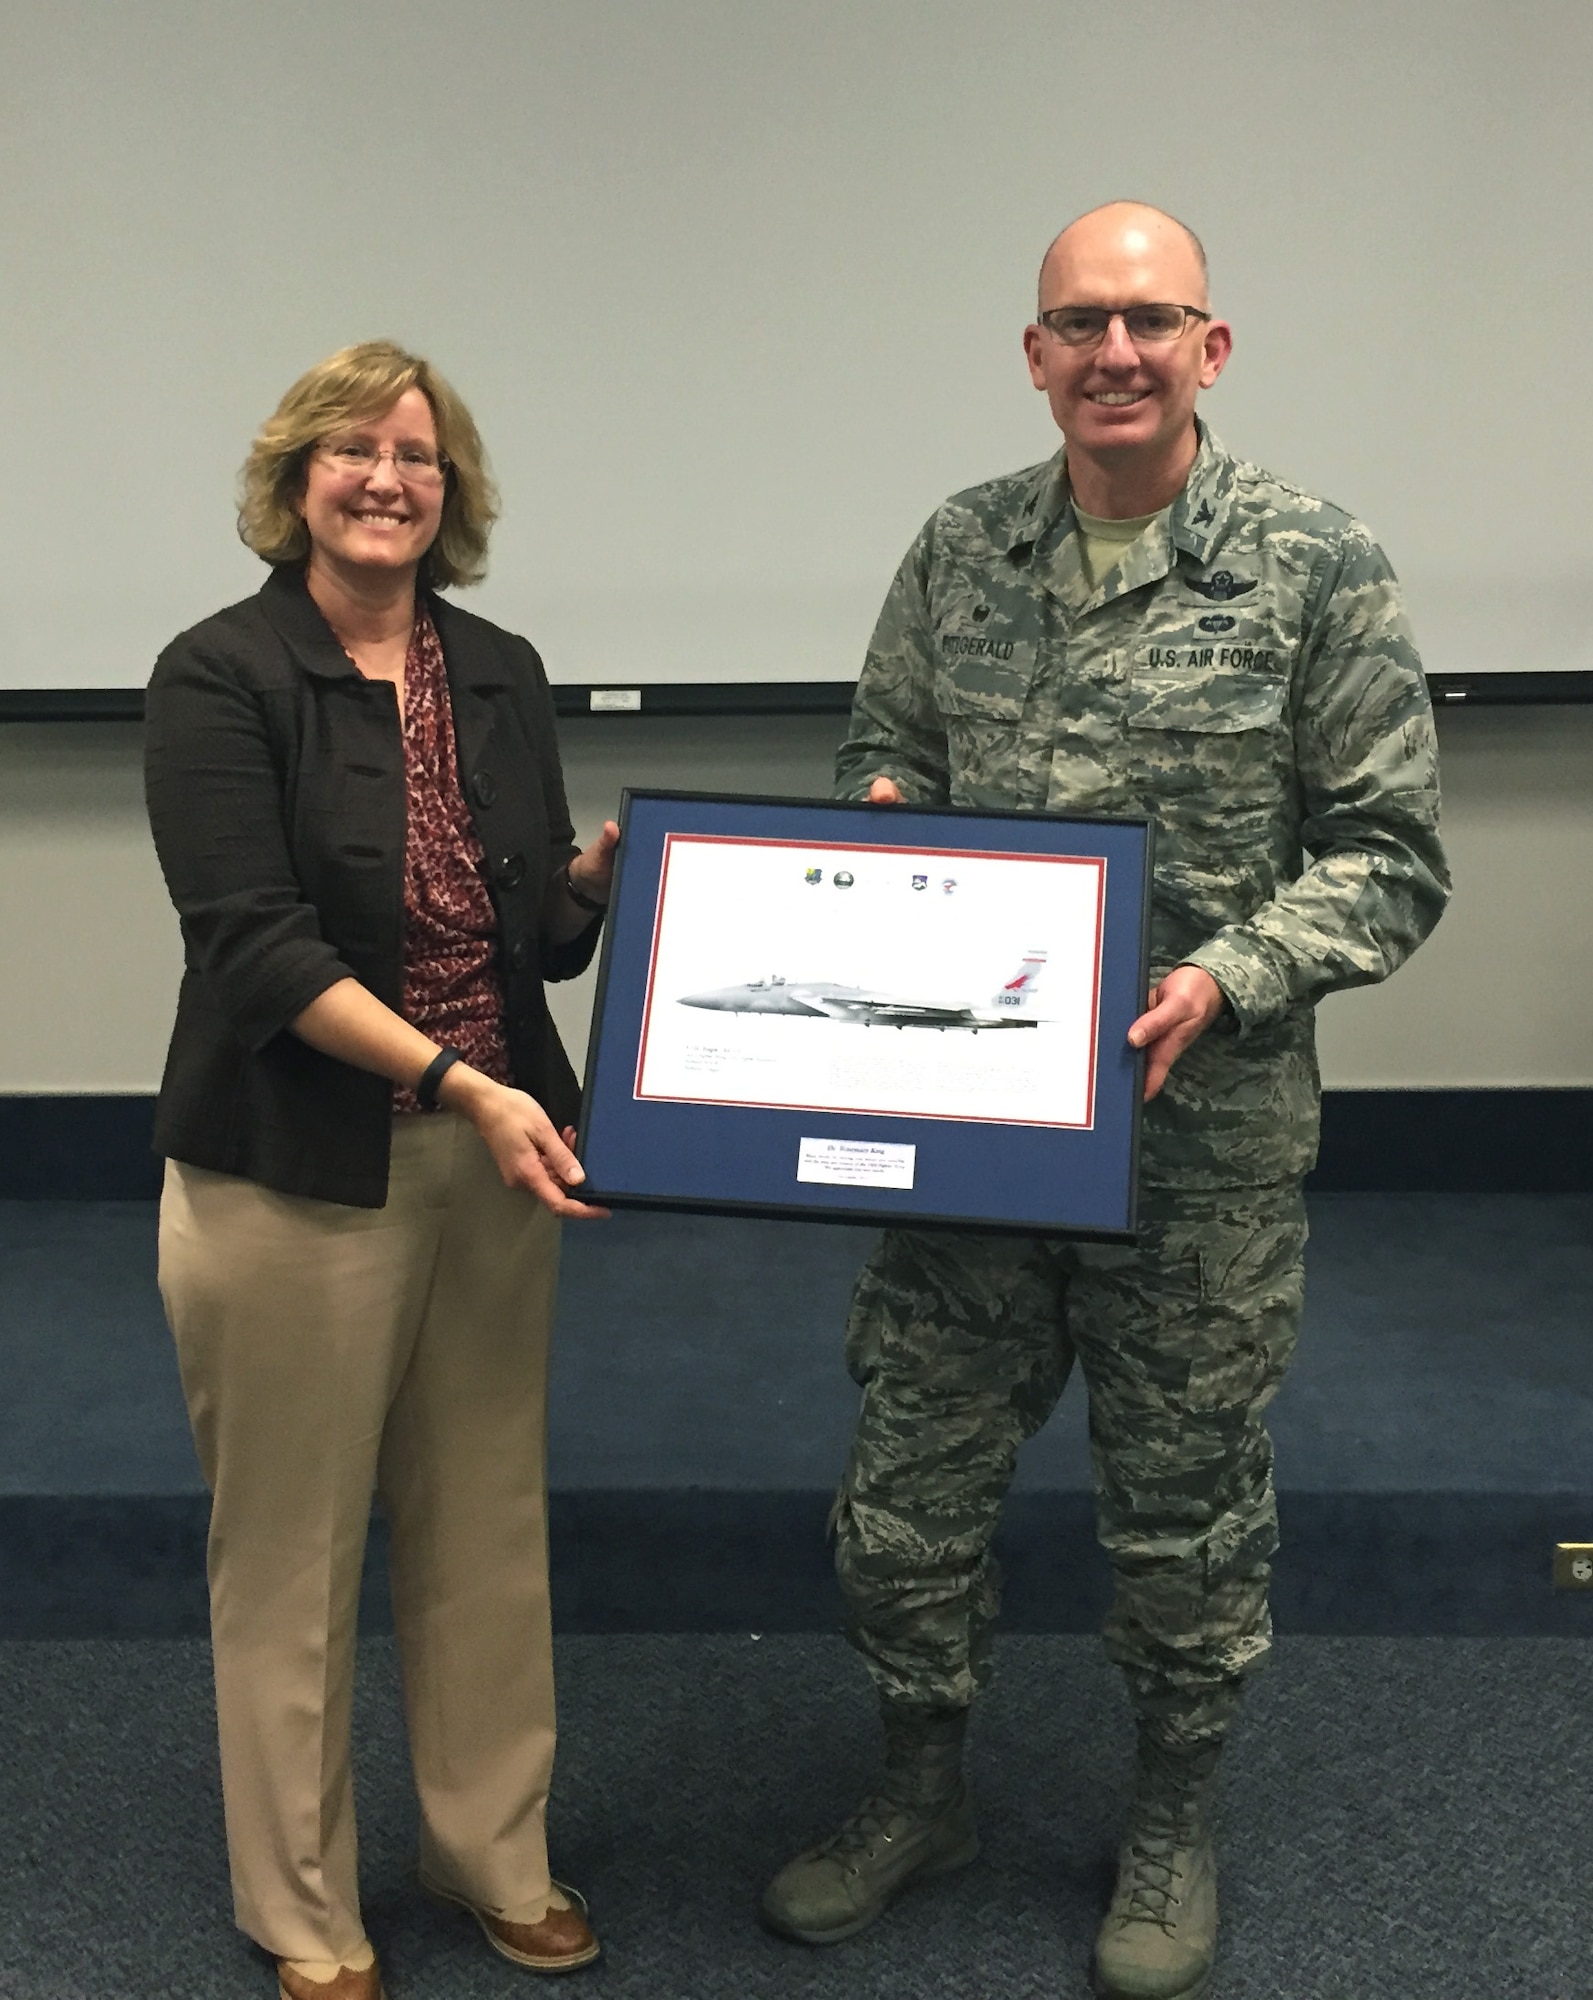 Col. Paul T. Fiztgerald, 142nd Fighter Wing commander, presents Dr. Rosemary King with a litho in appreciation for her two-day training on speech writing and delivery techniques held at Portland Air National Guard Base, Ore., Dec. 17, 2015.  King’s presentation skills training is the most recent contribution to the Wing’s ongoing mentorship program. (U.S. Air National Guard photo by 1st Lt. Chelsi Spence, 142nd Fighter Wing Public Affairs)